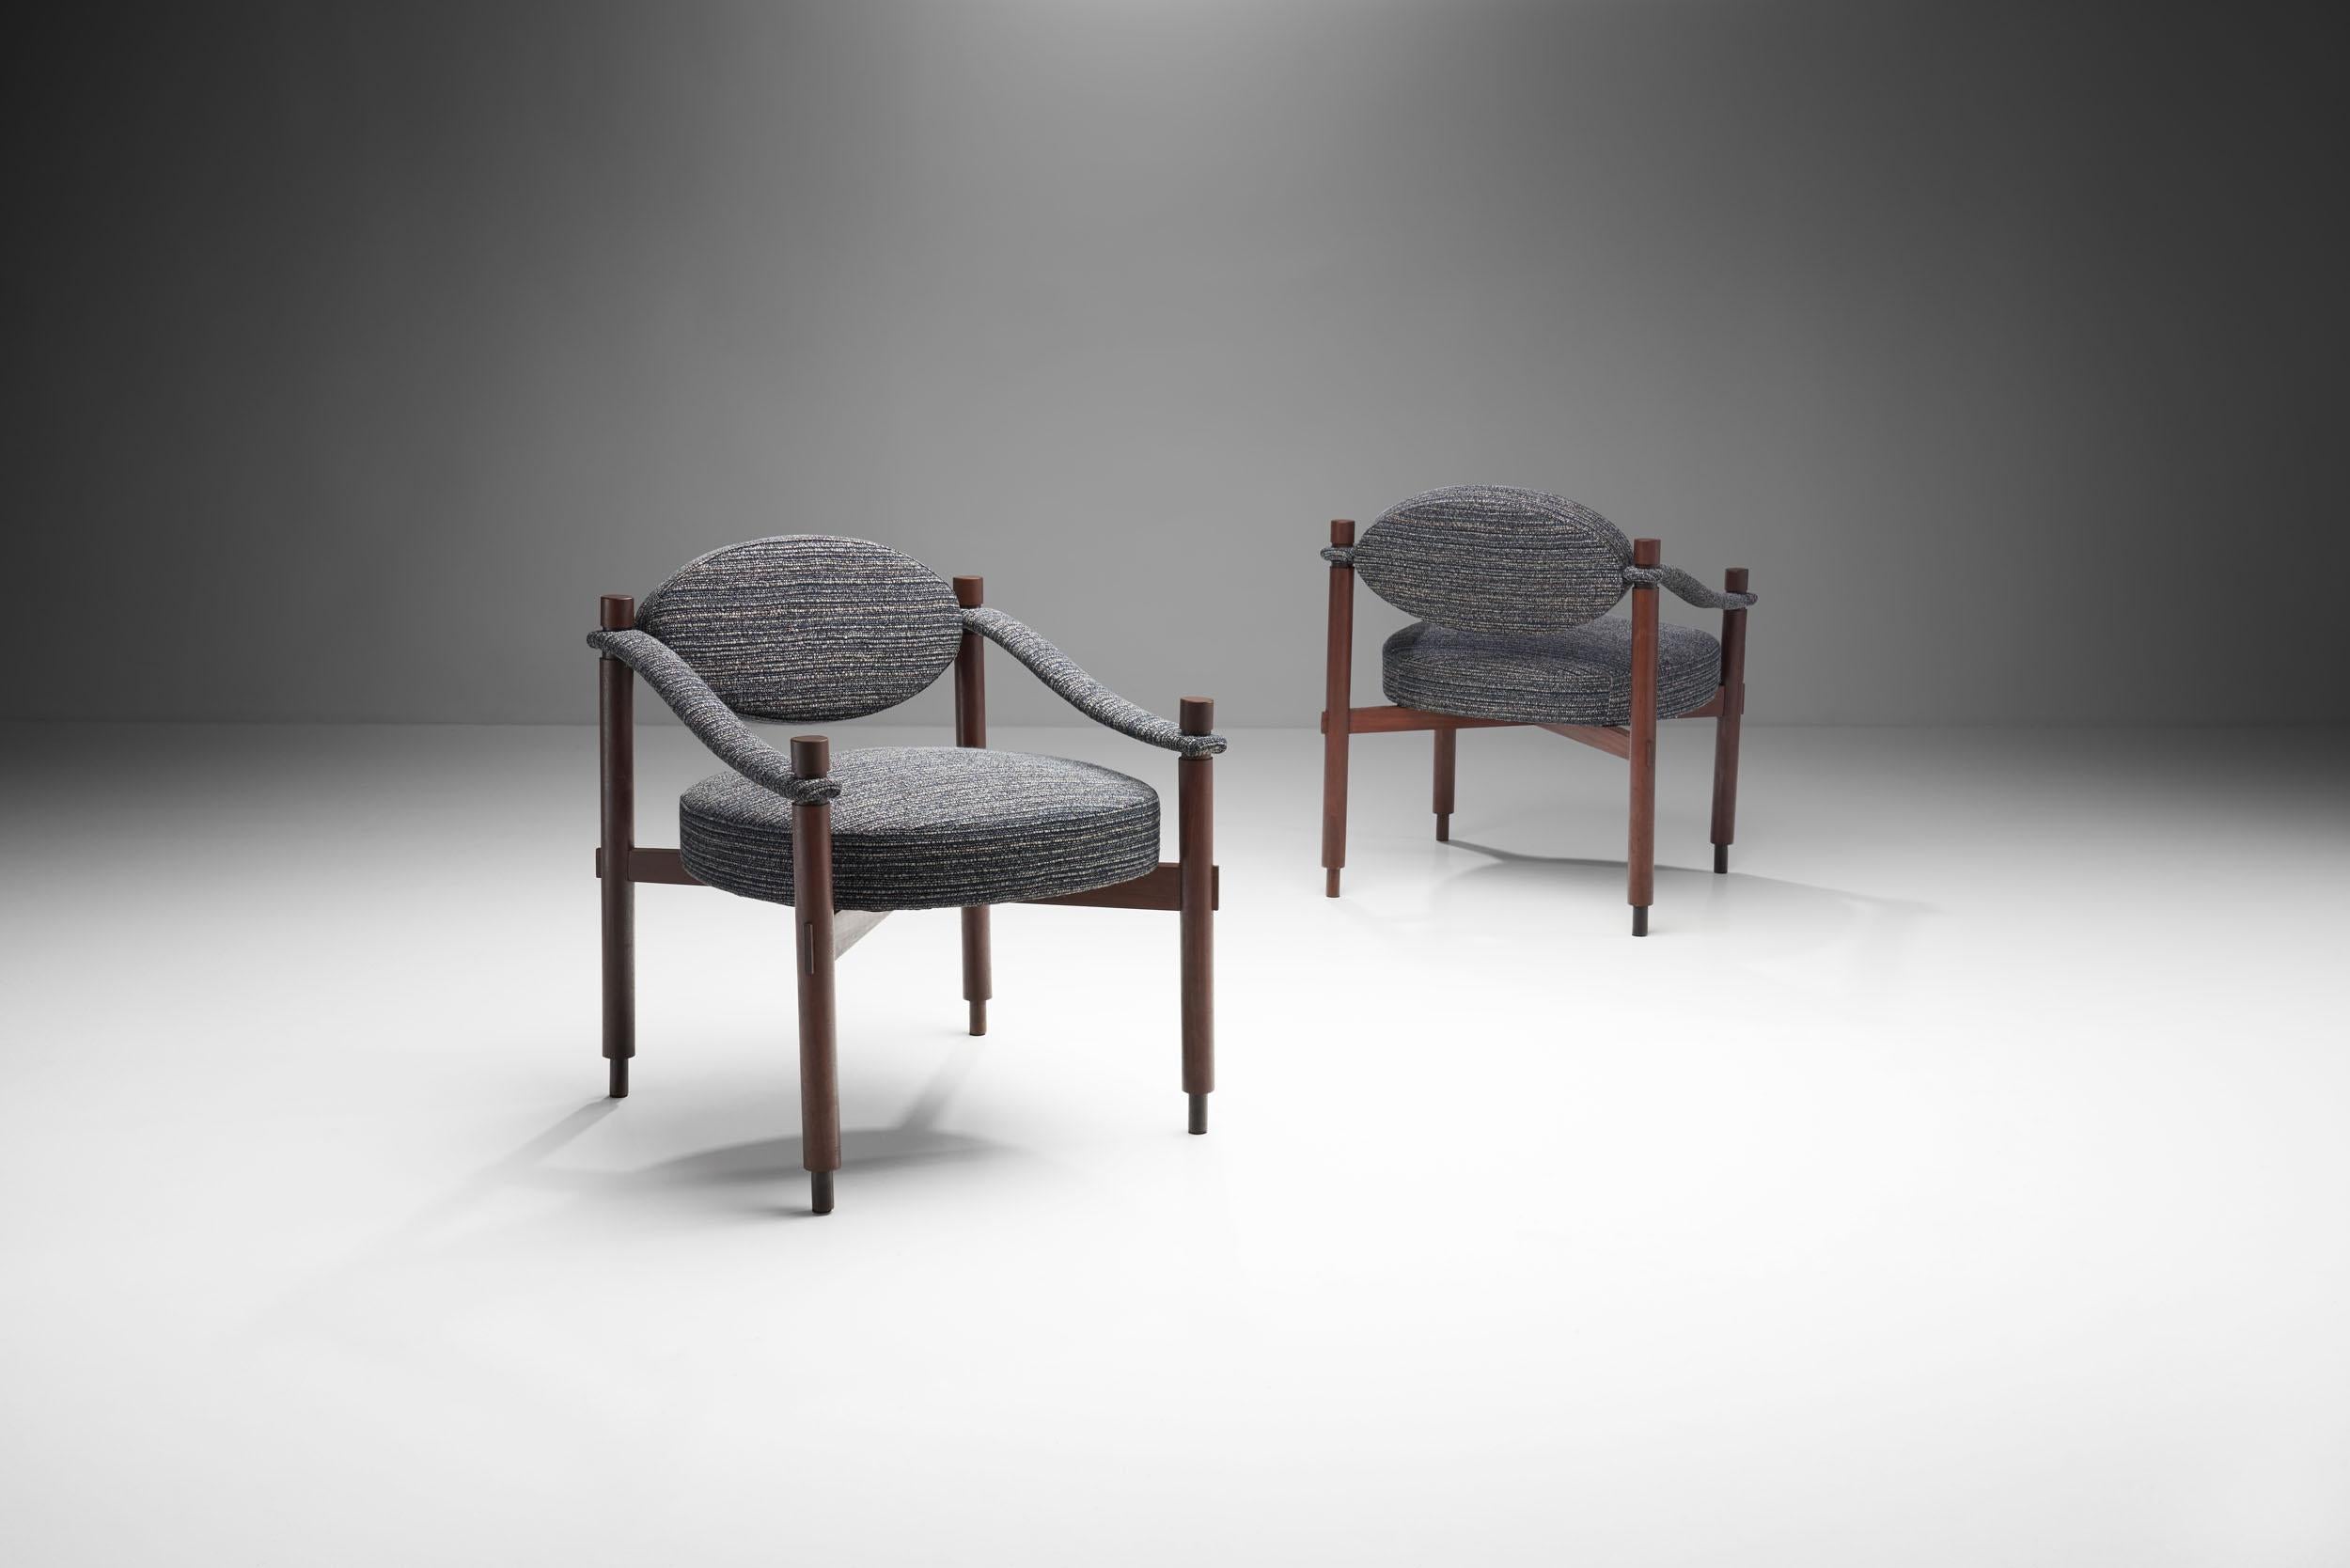 These Italian chairs were designed with high attention to detail, which is visible in the unique curves and clear geometric shapes. Characterized by silky lines and textures, this pair is exemplary of Italian mid-century design.

This pair feature